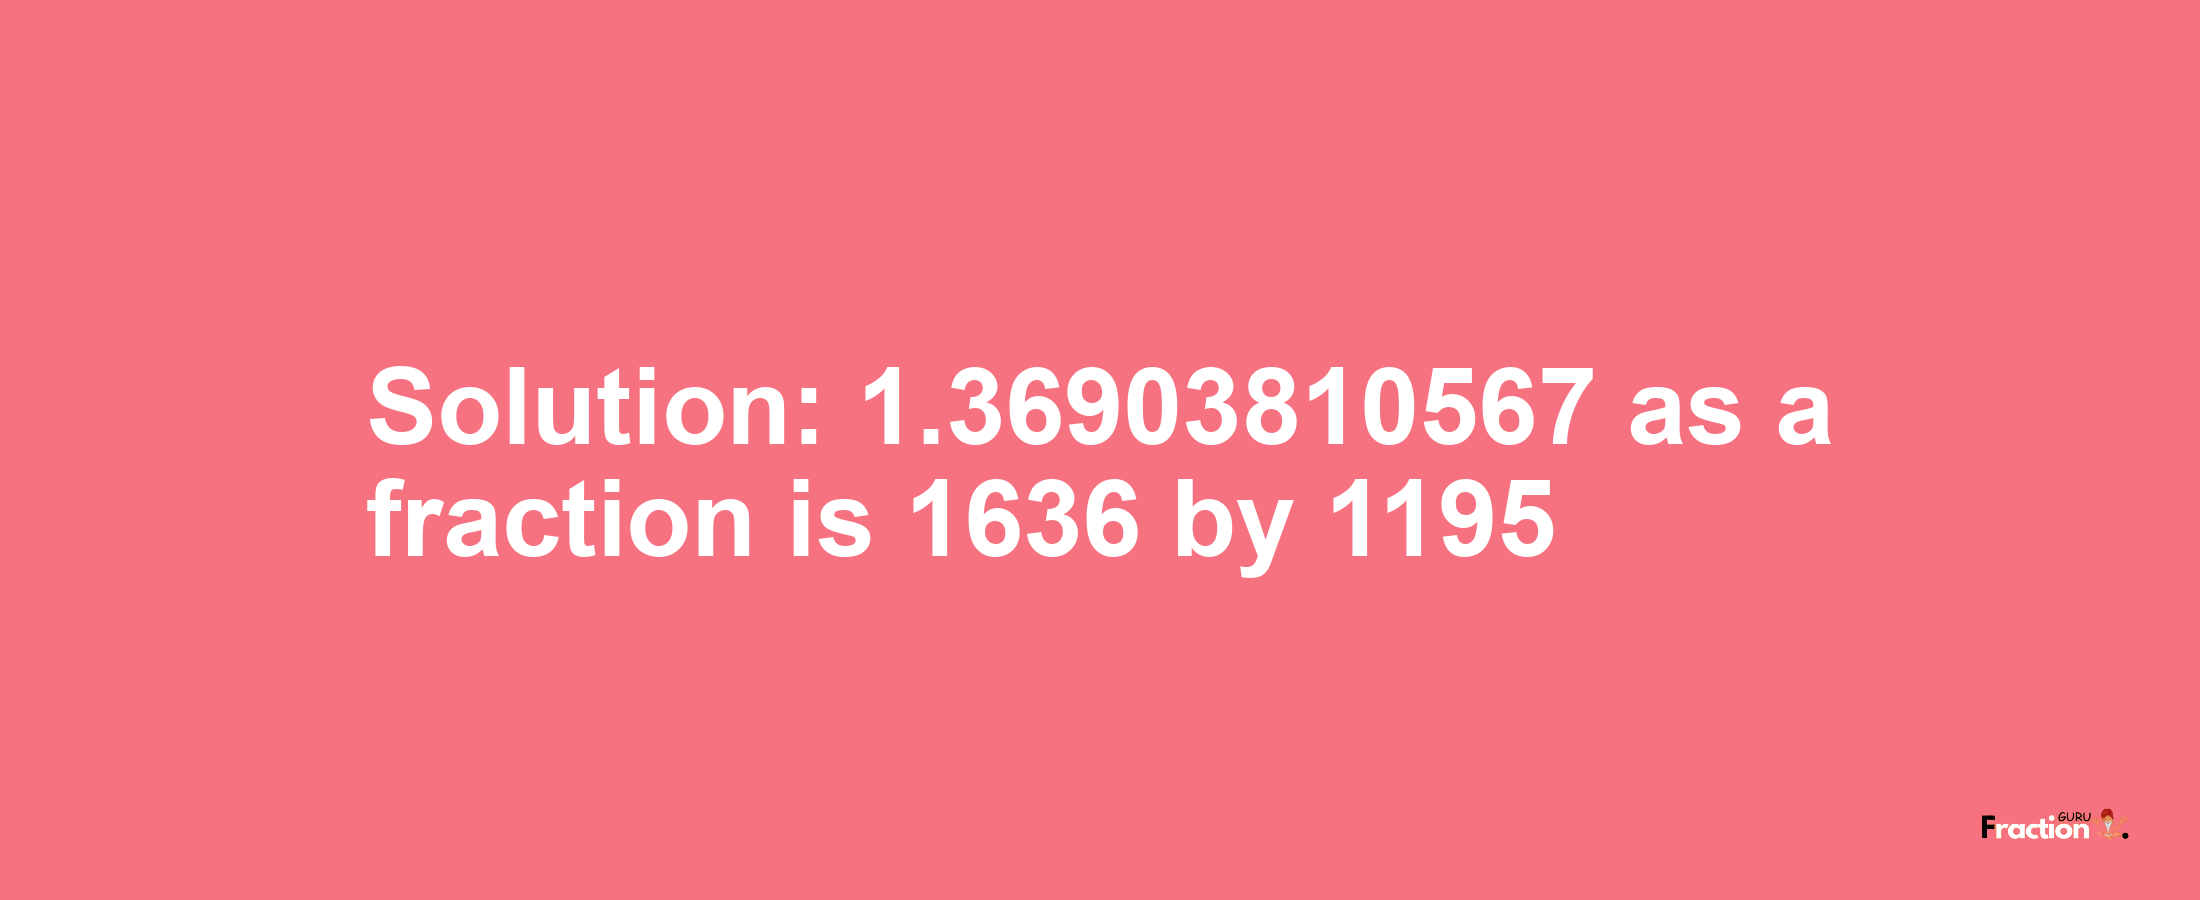 Solution:1.36903810567 as a fraction is 1636/1195